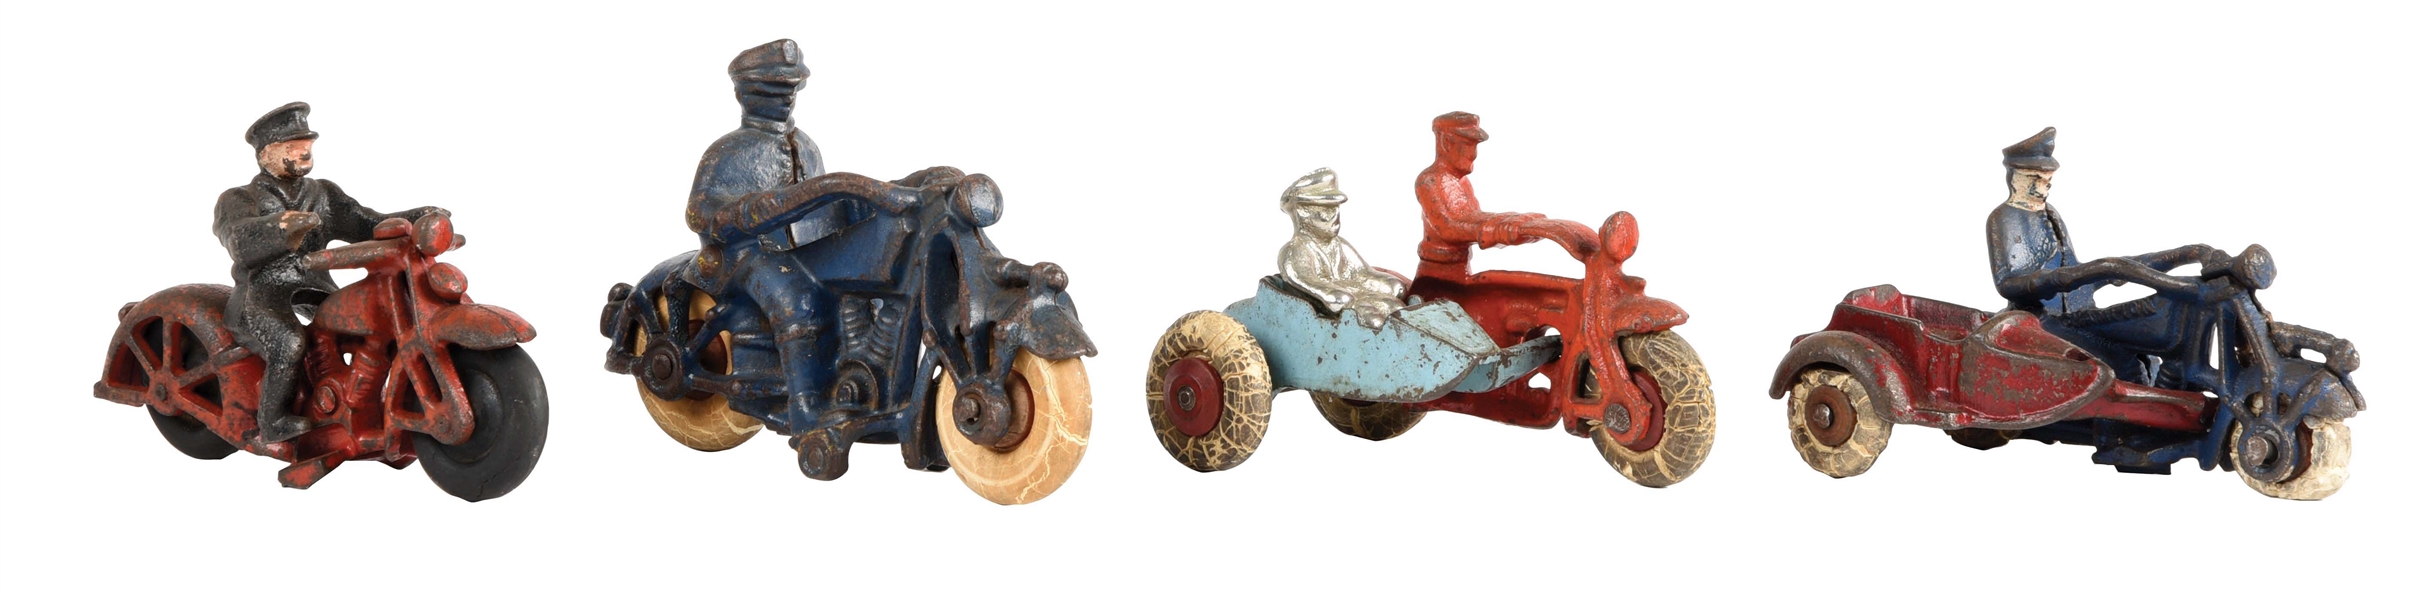 LOT OF 4: CAST-IRON AMERICAN MADE MOTORCYCLE TOYS.